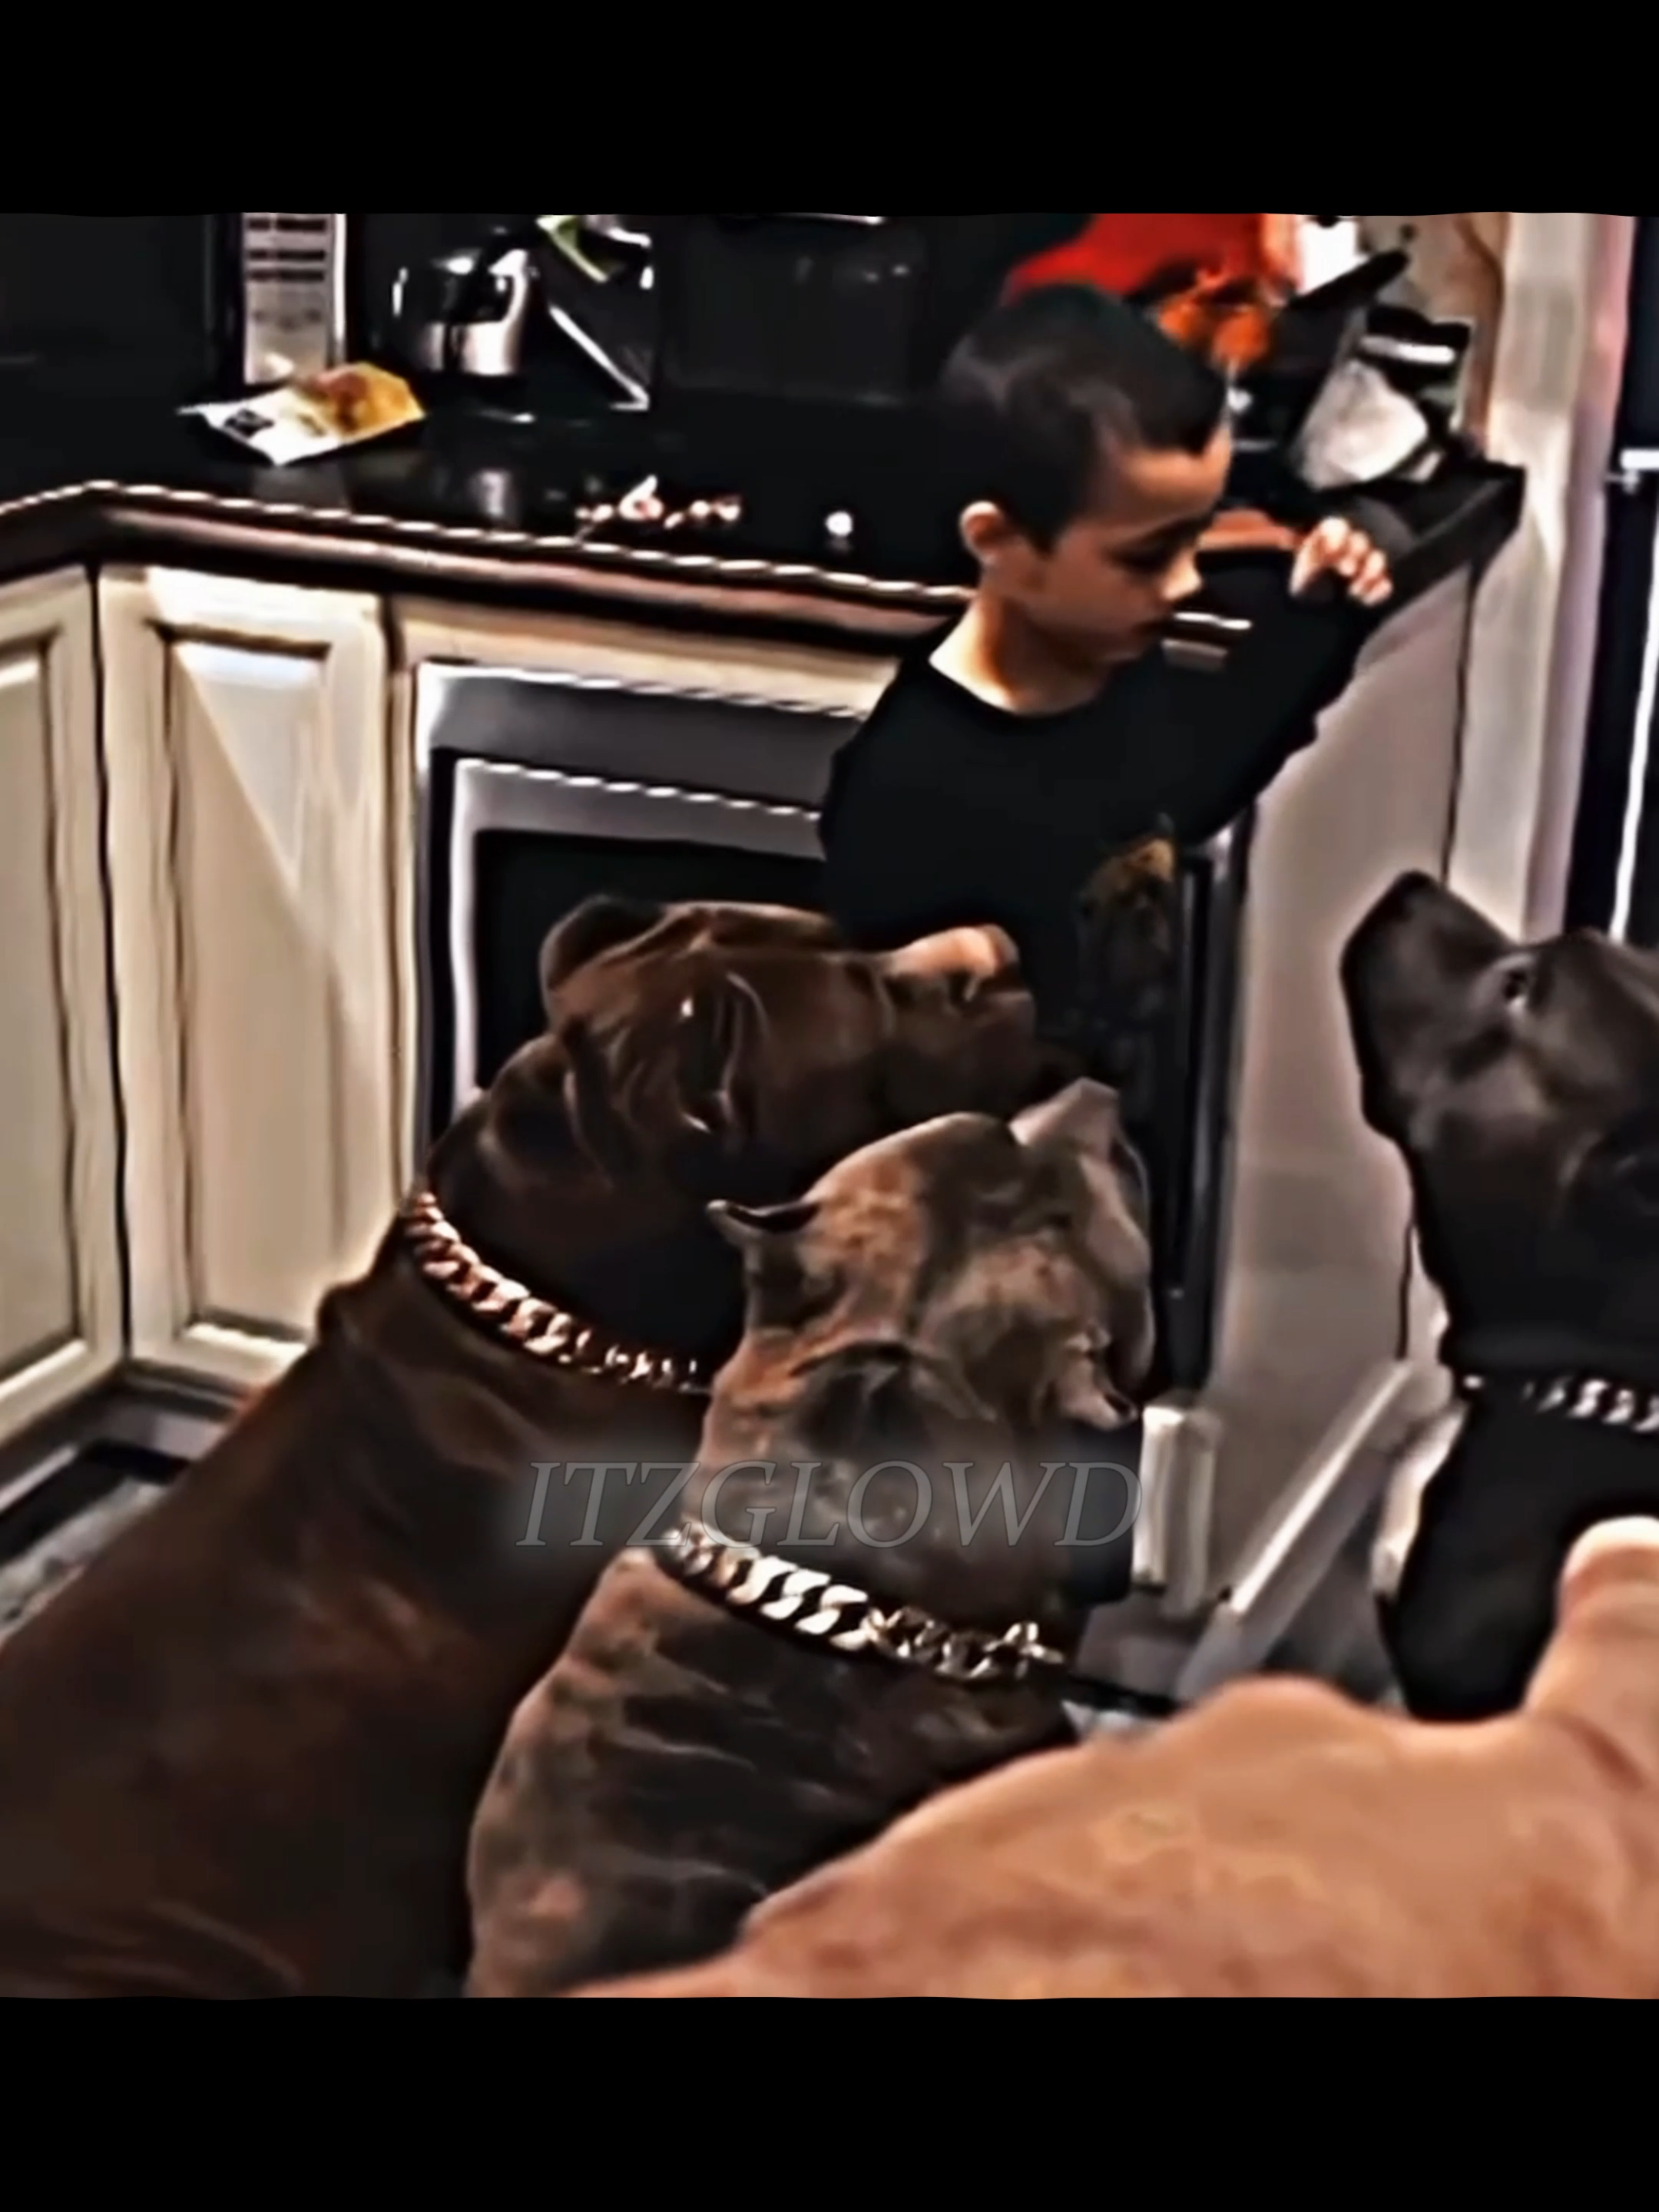 This Kid got a Dog Army.. 💯🫡 | SIGMA 🗿🍷| #viral #edit #dog #animals #sigma #sigmarules #trend #trending #sigma #respect